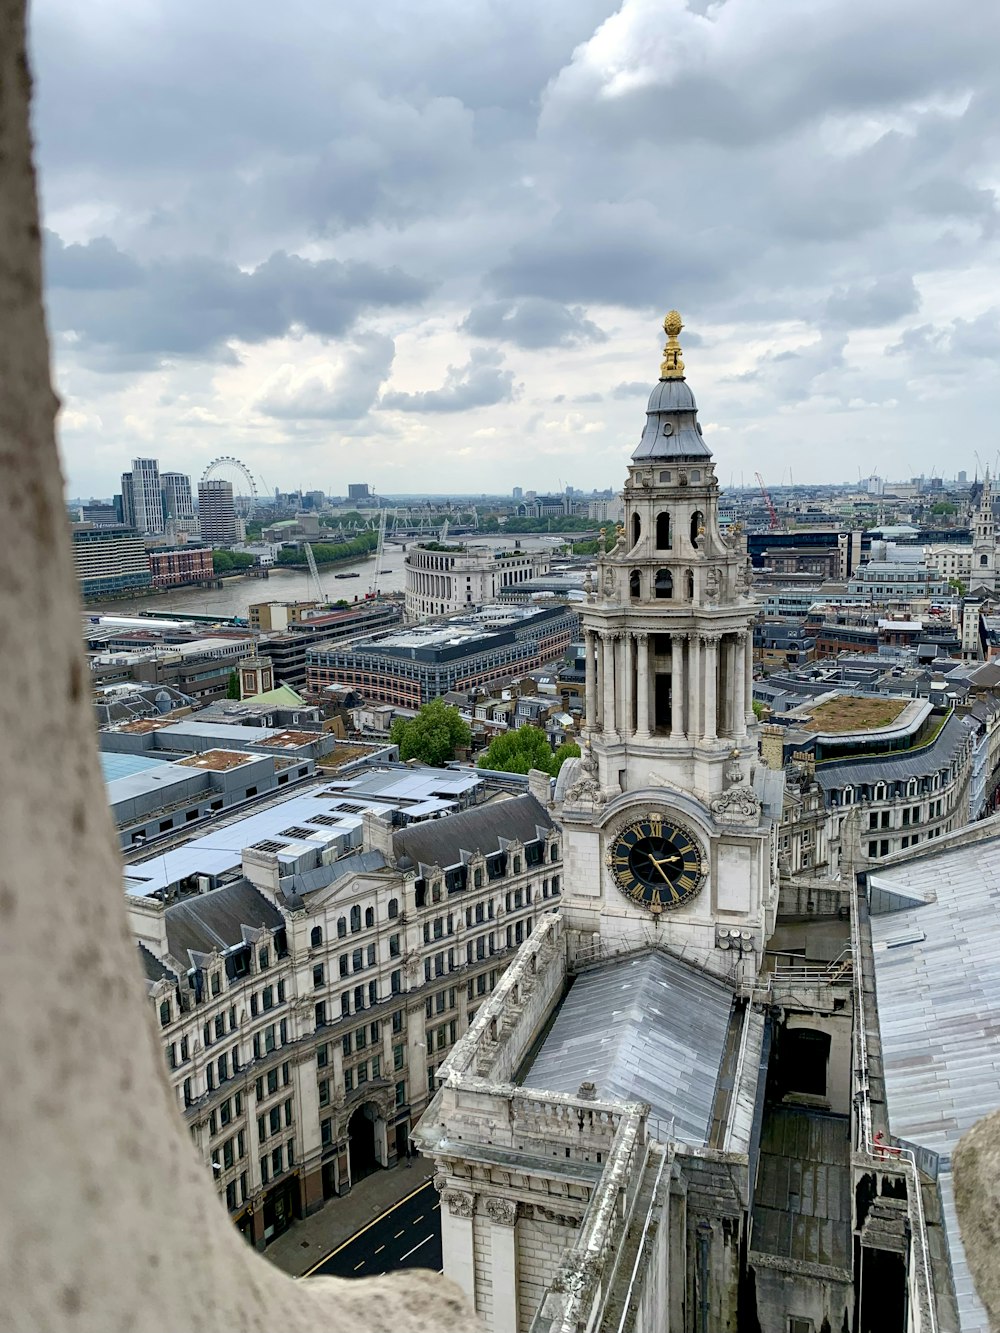 a view of a clock tower from the top of a building